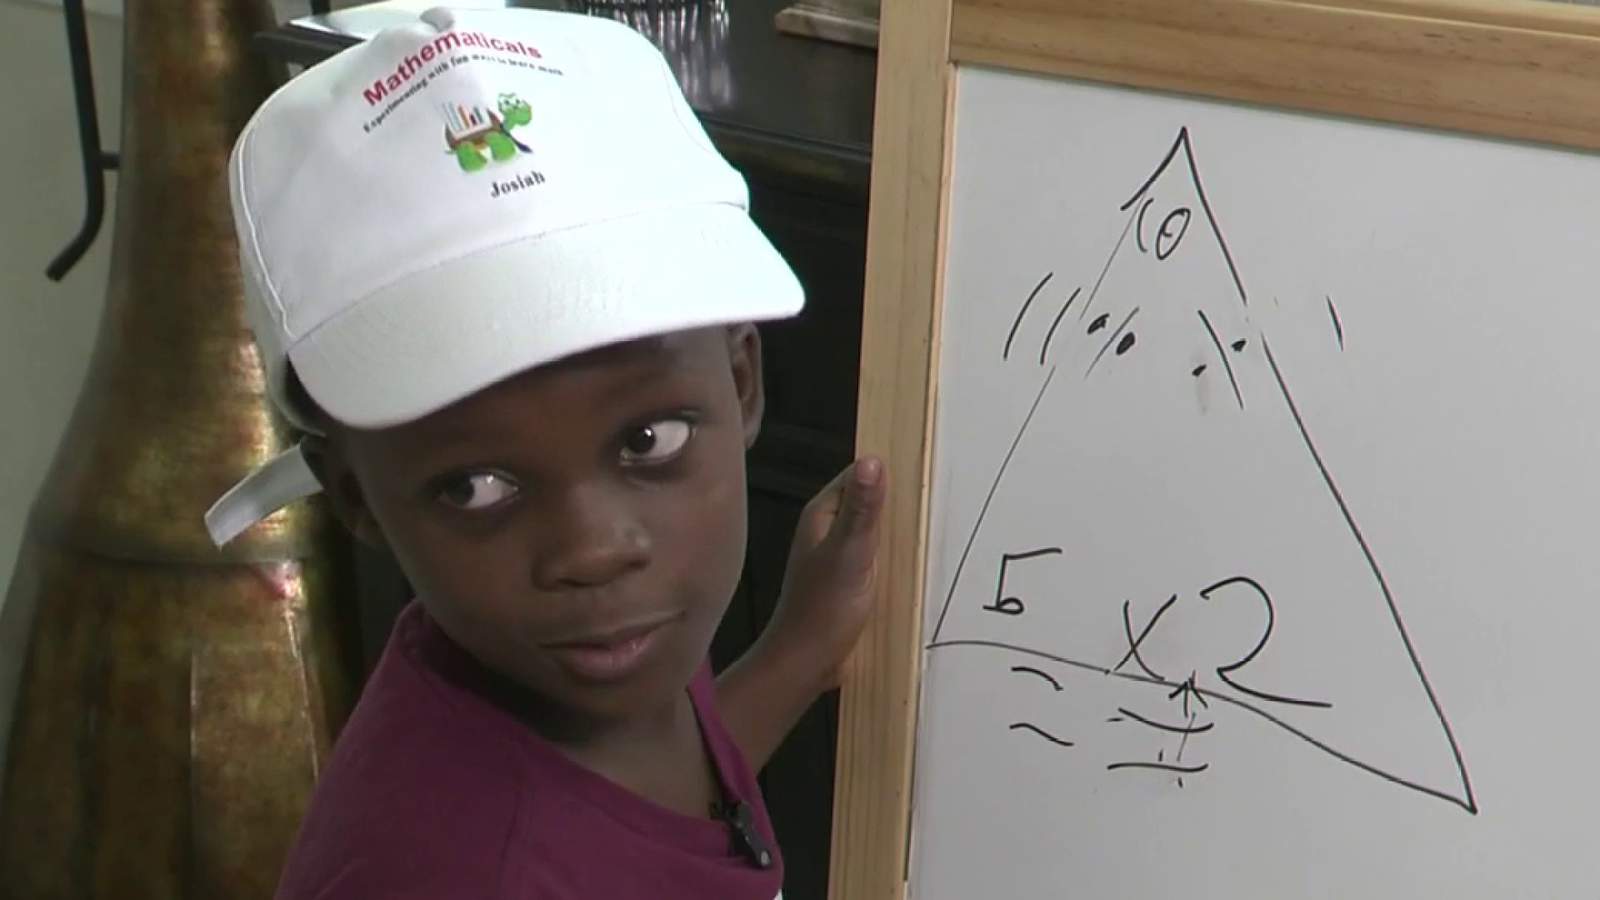 What’s Up South Texas!: San Antonio 7-year-old educates elementary kids in math during pandemic